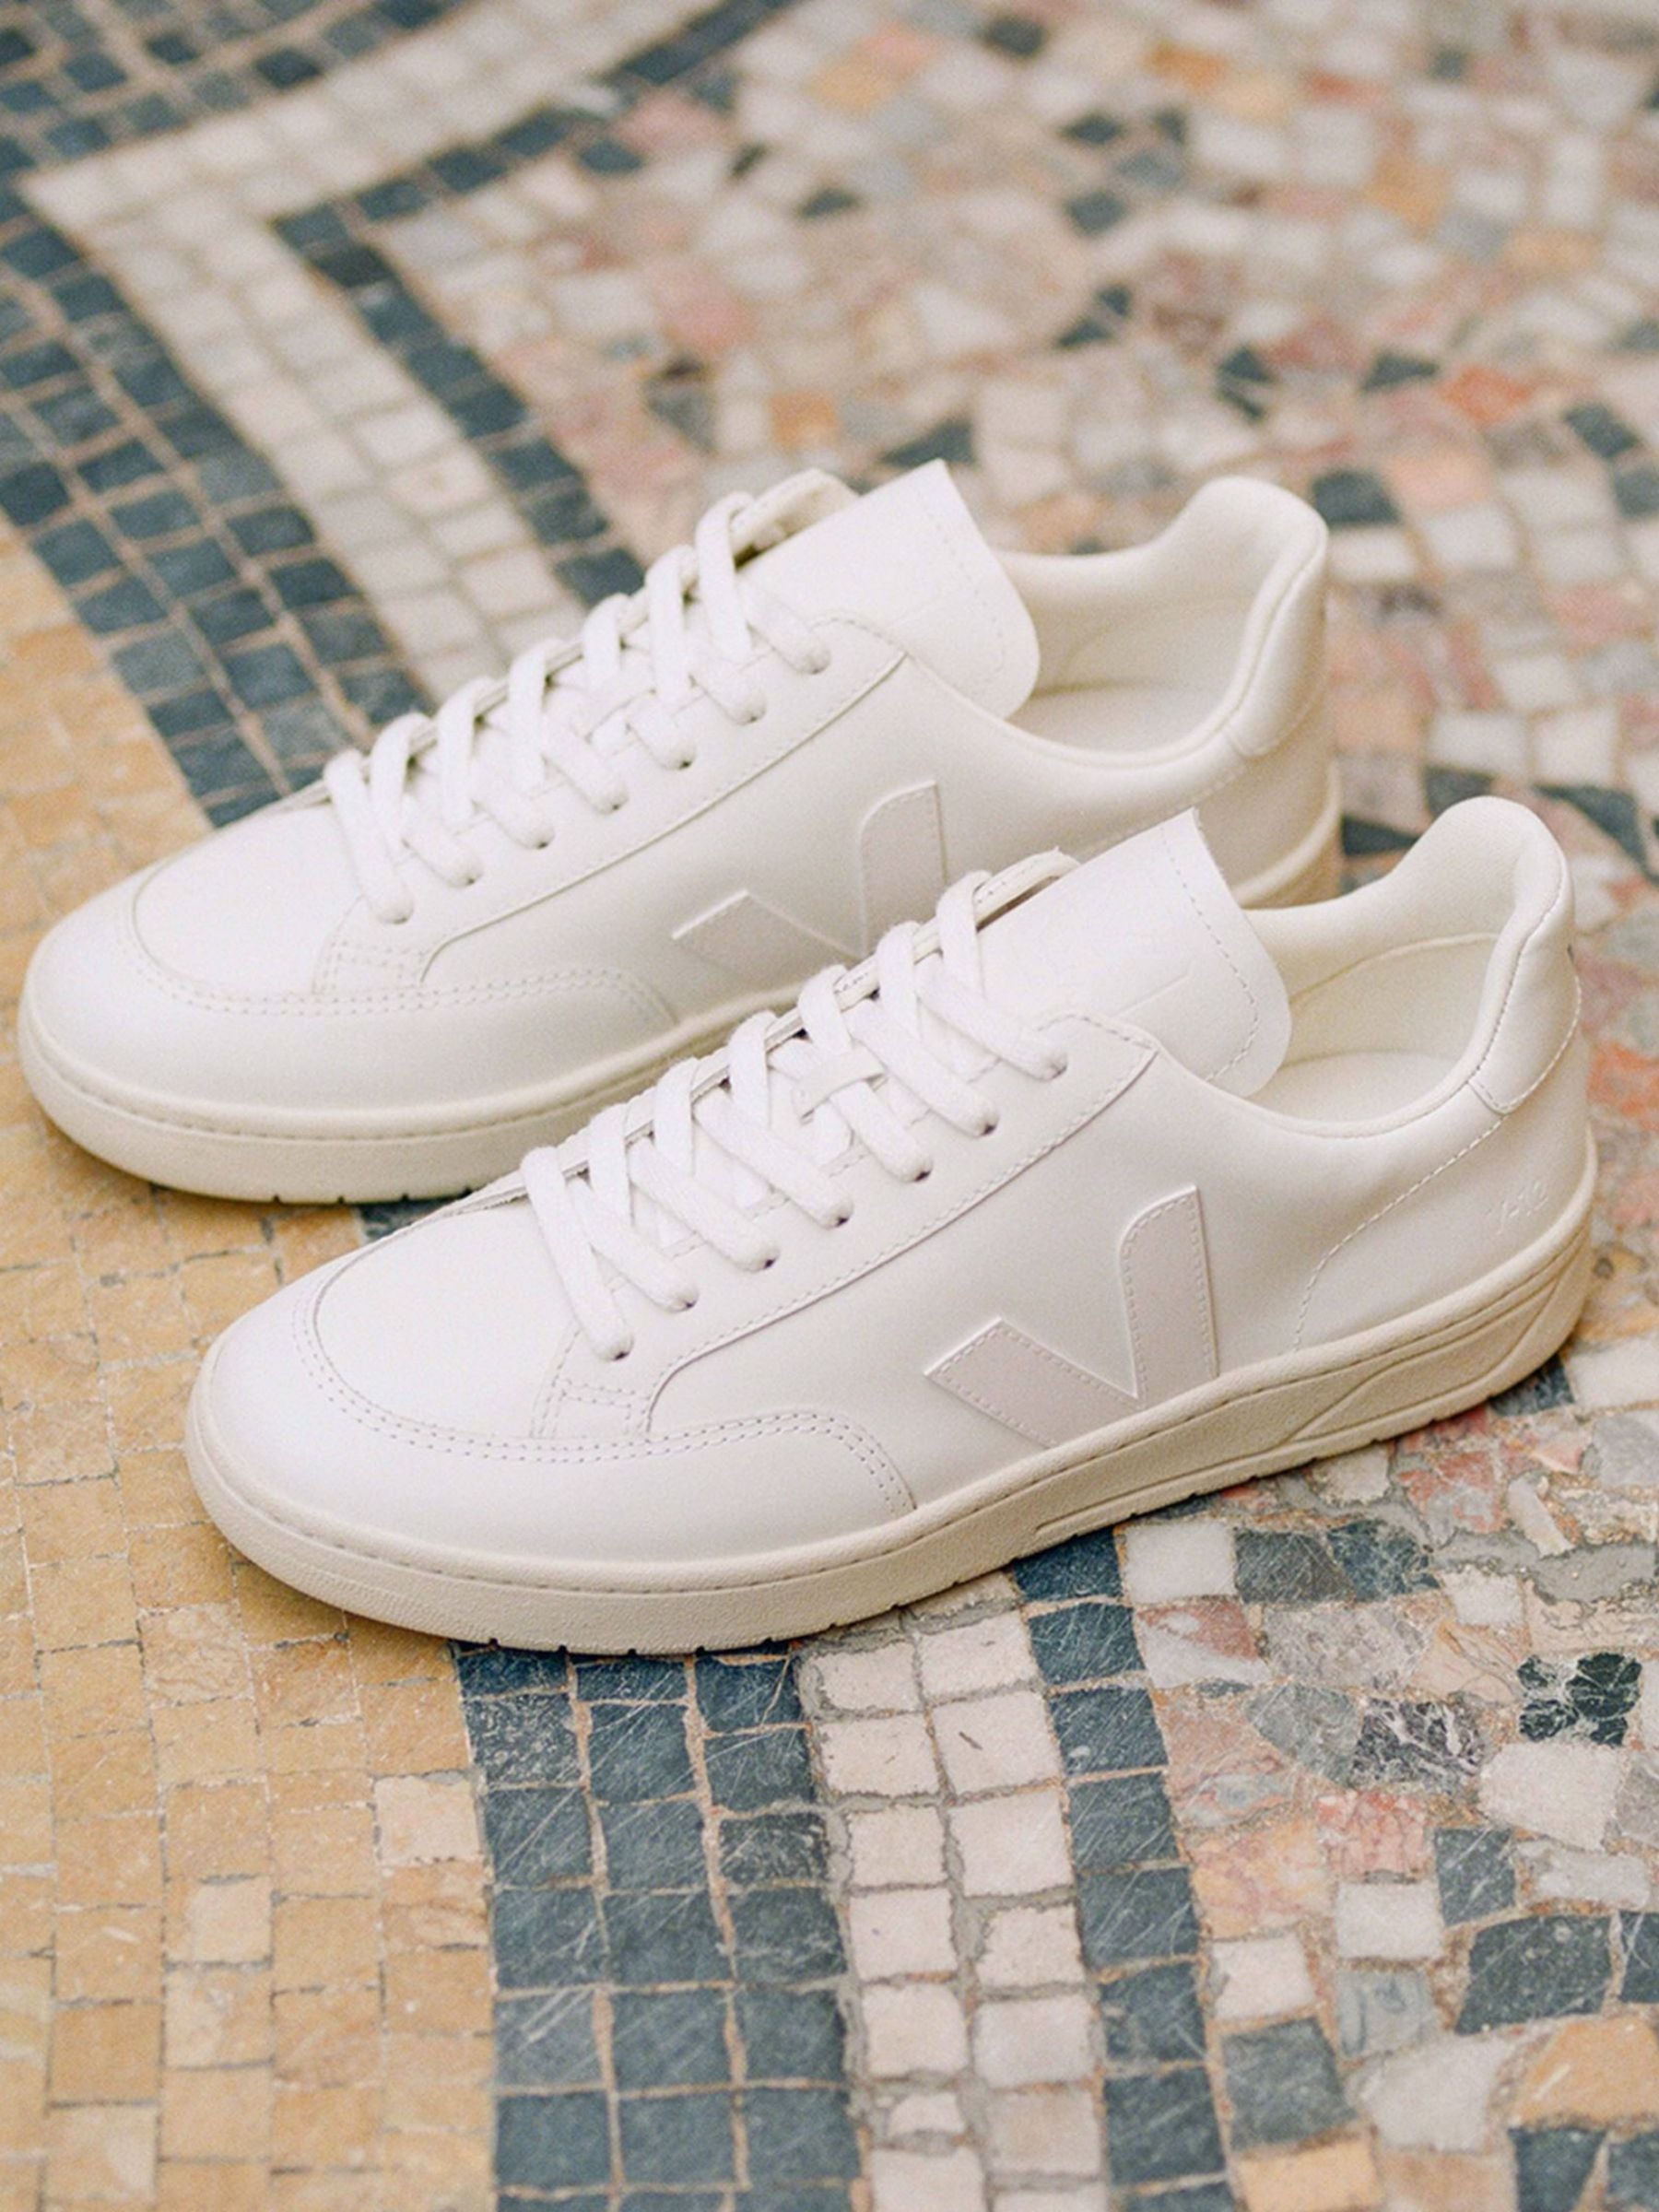 Sneakers V-12 Leather Extra White In Sustainable Leather | Veja